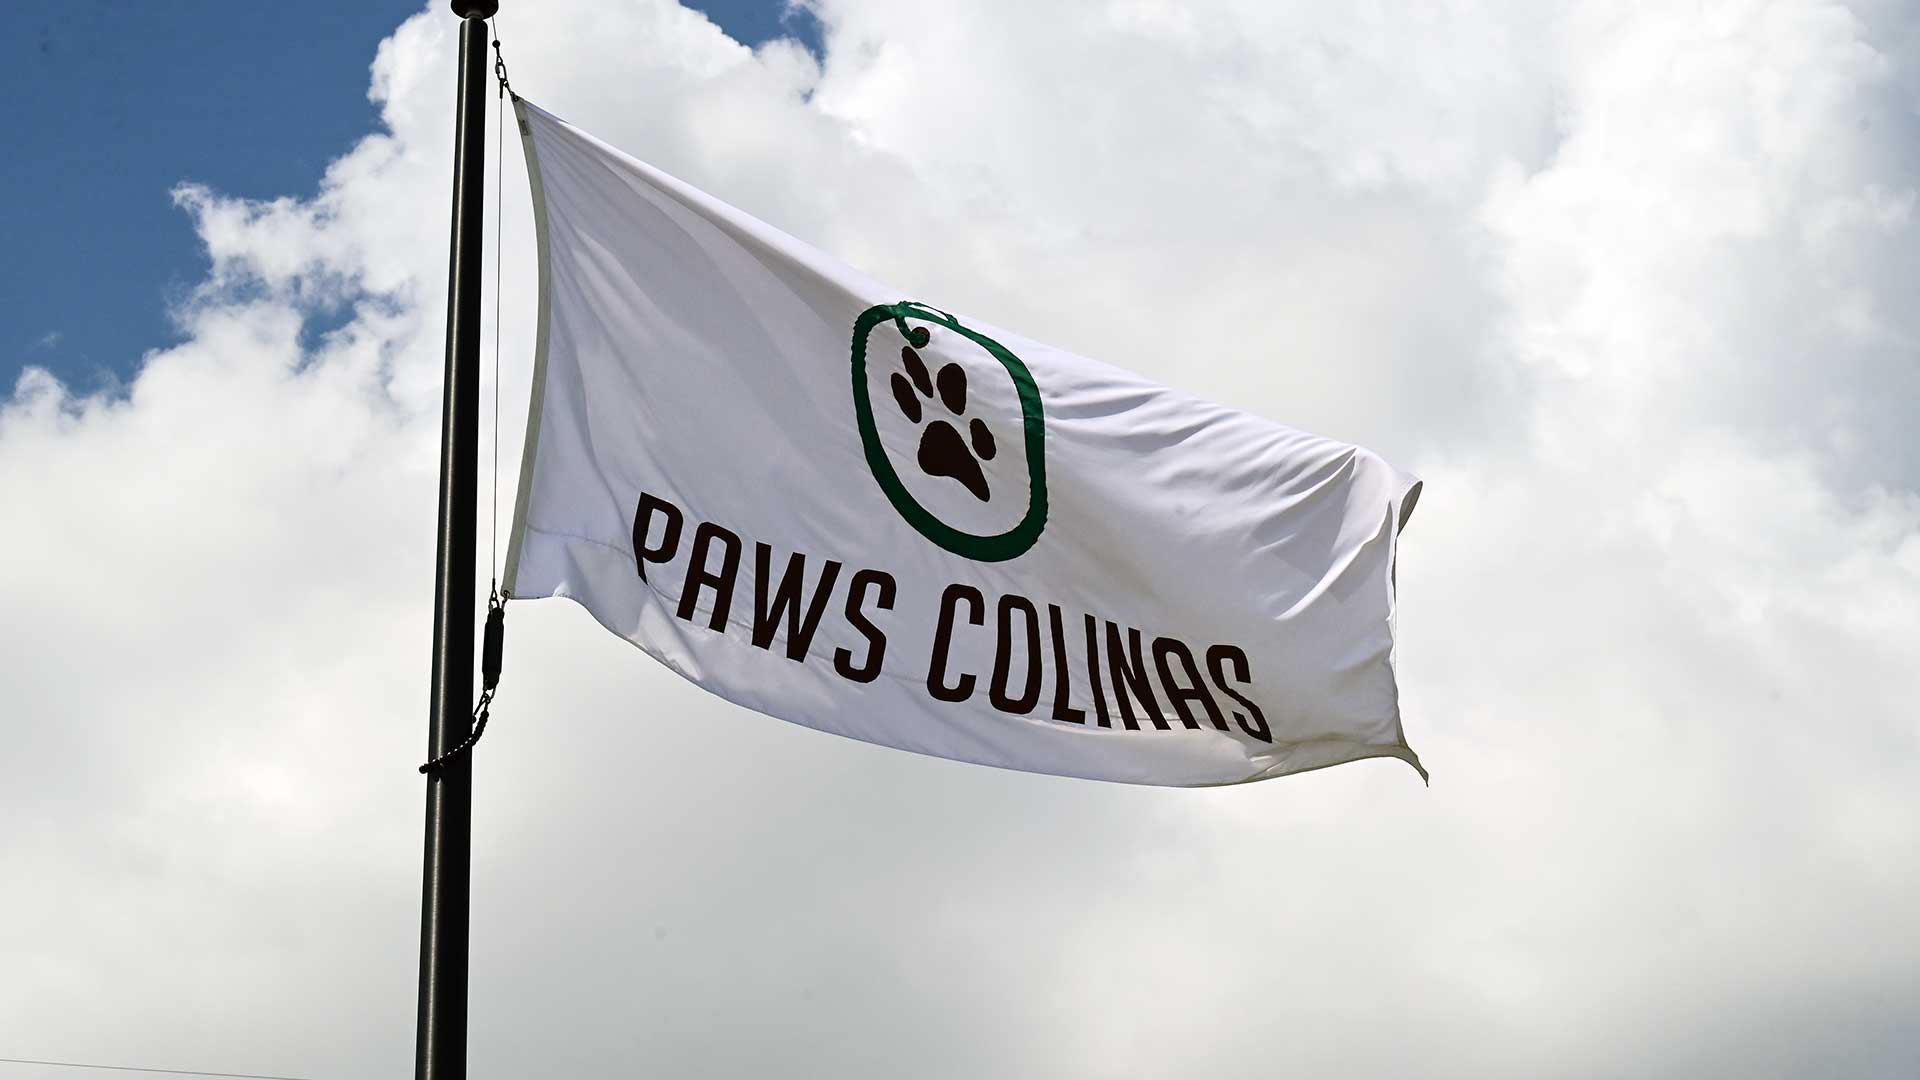 A close-up of the white flag that says "Paws Colinas" on it atop a flag pole on a cloudy day.